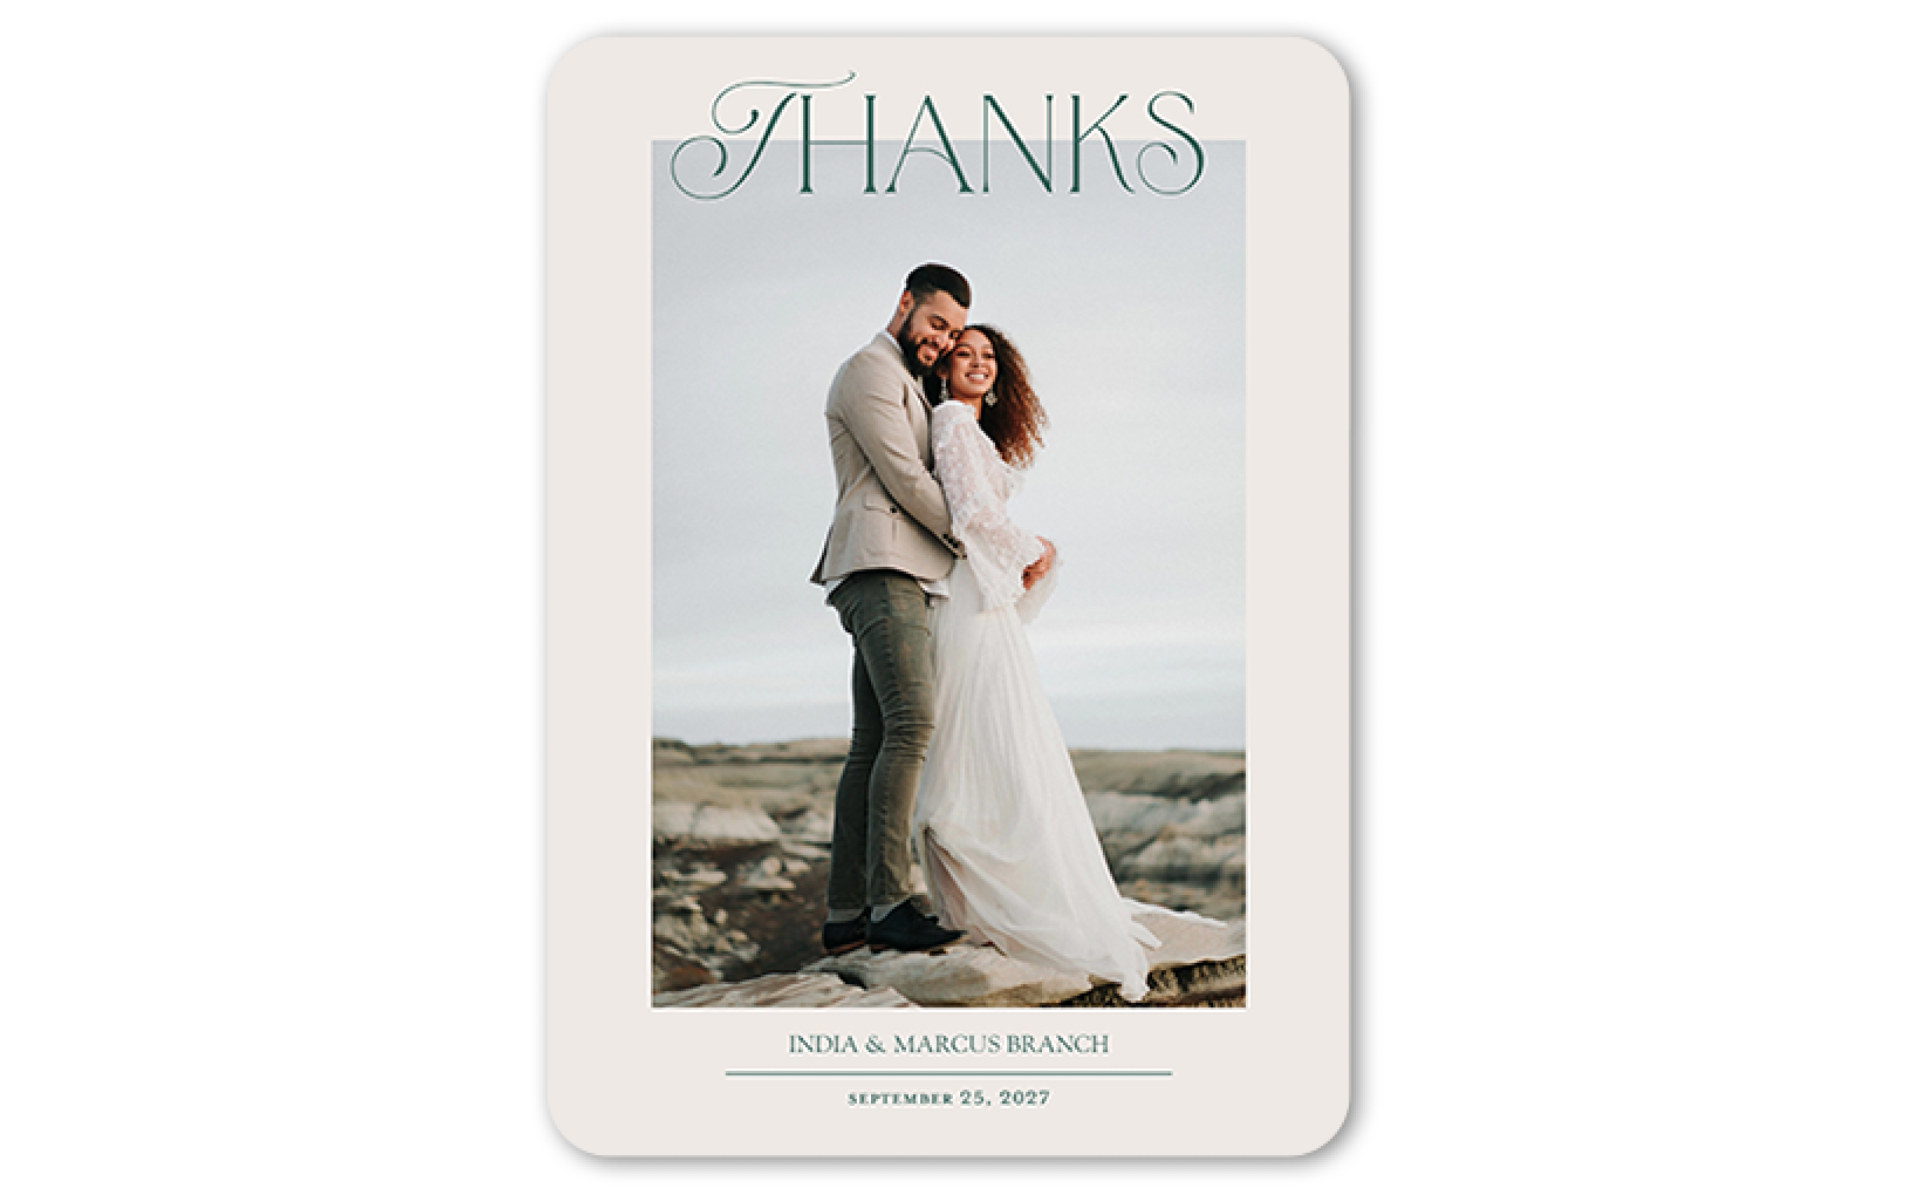 Thank-you card with the word &quot;thanks&quot; written on it, picture of couple, and date of wedding